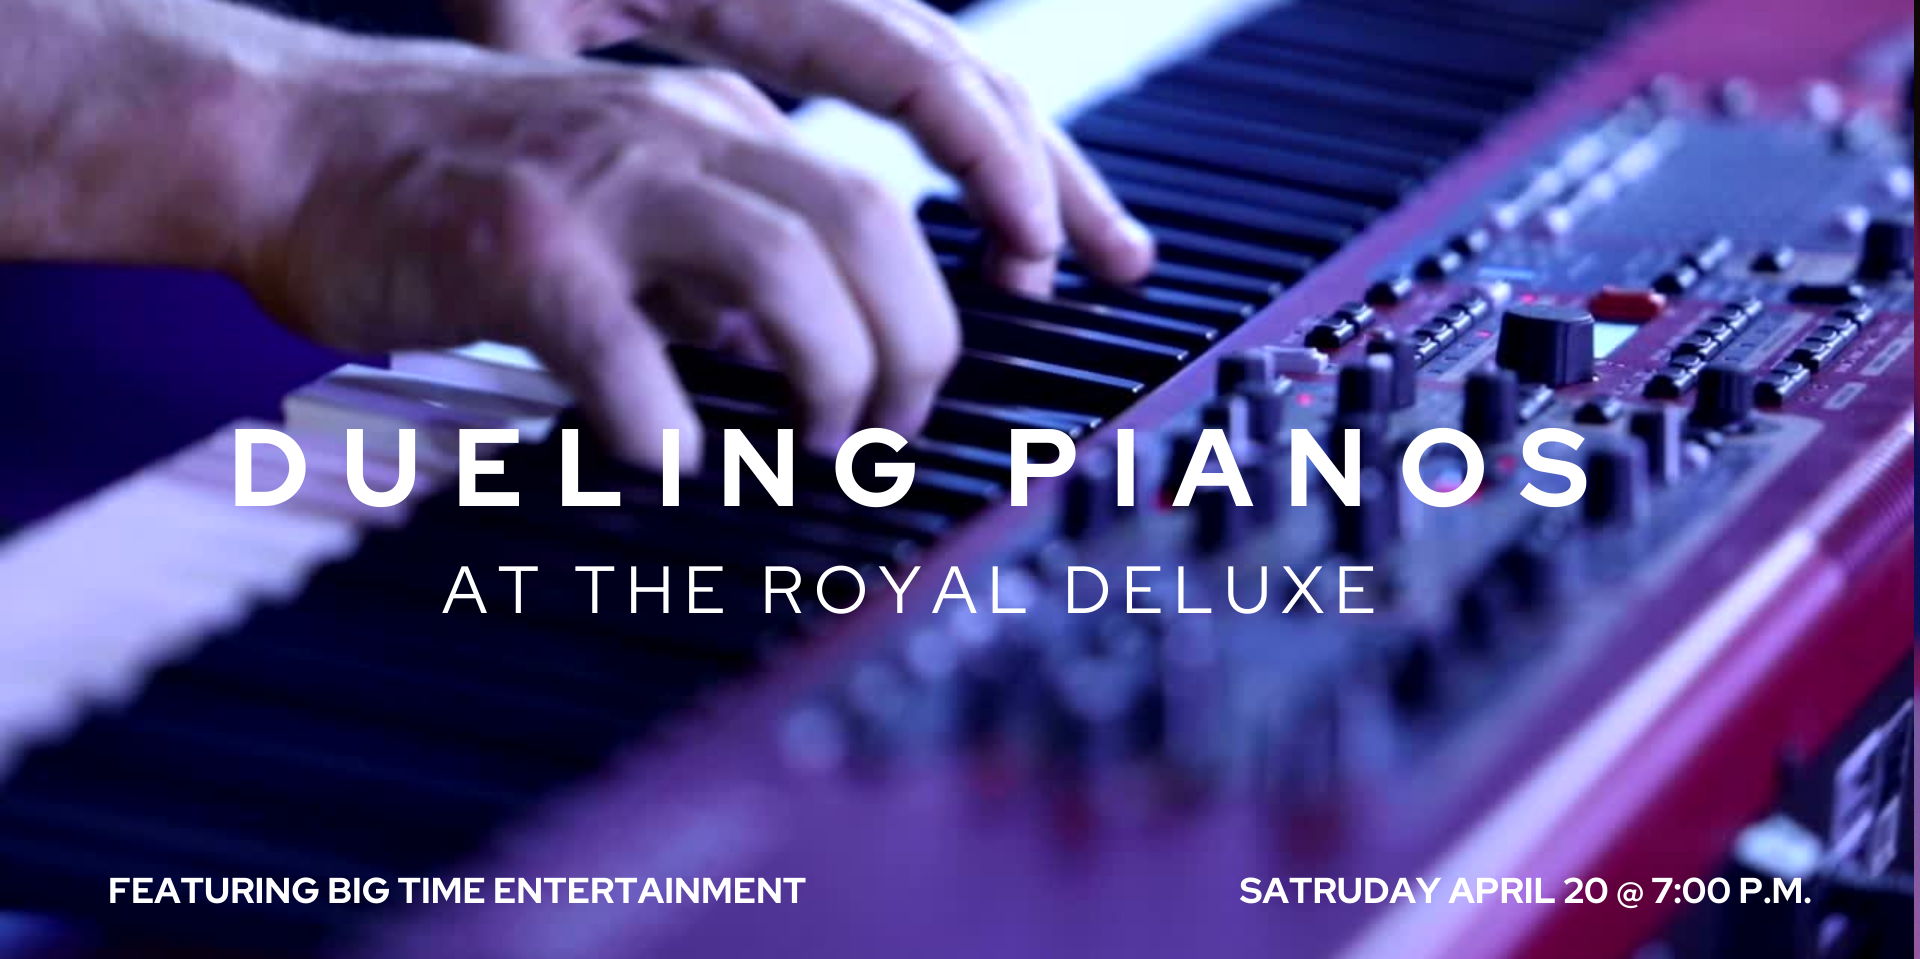 Dueling Pianos at the Royal Deluxe promotional image